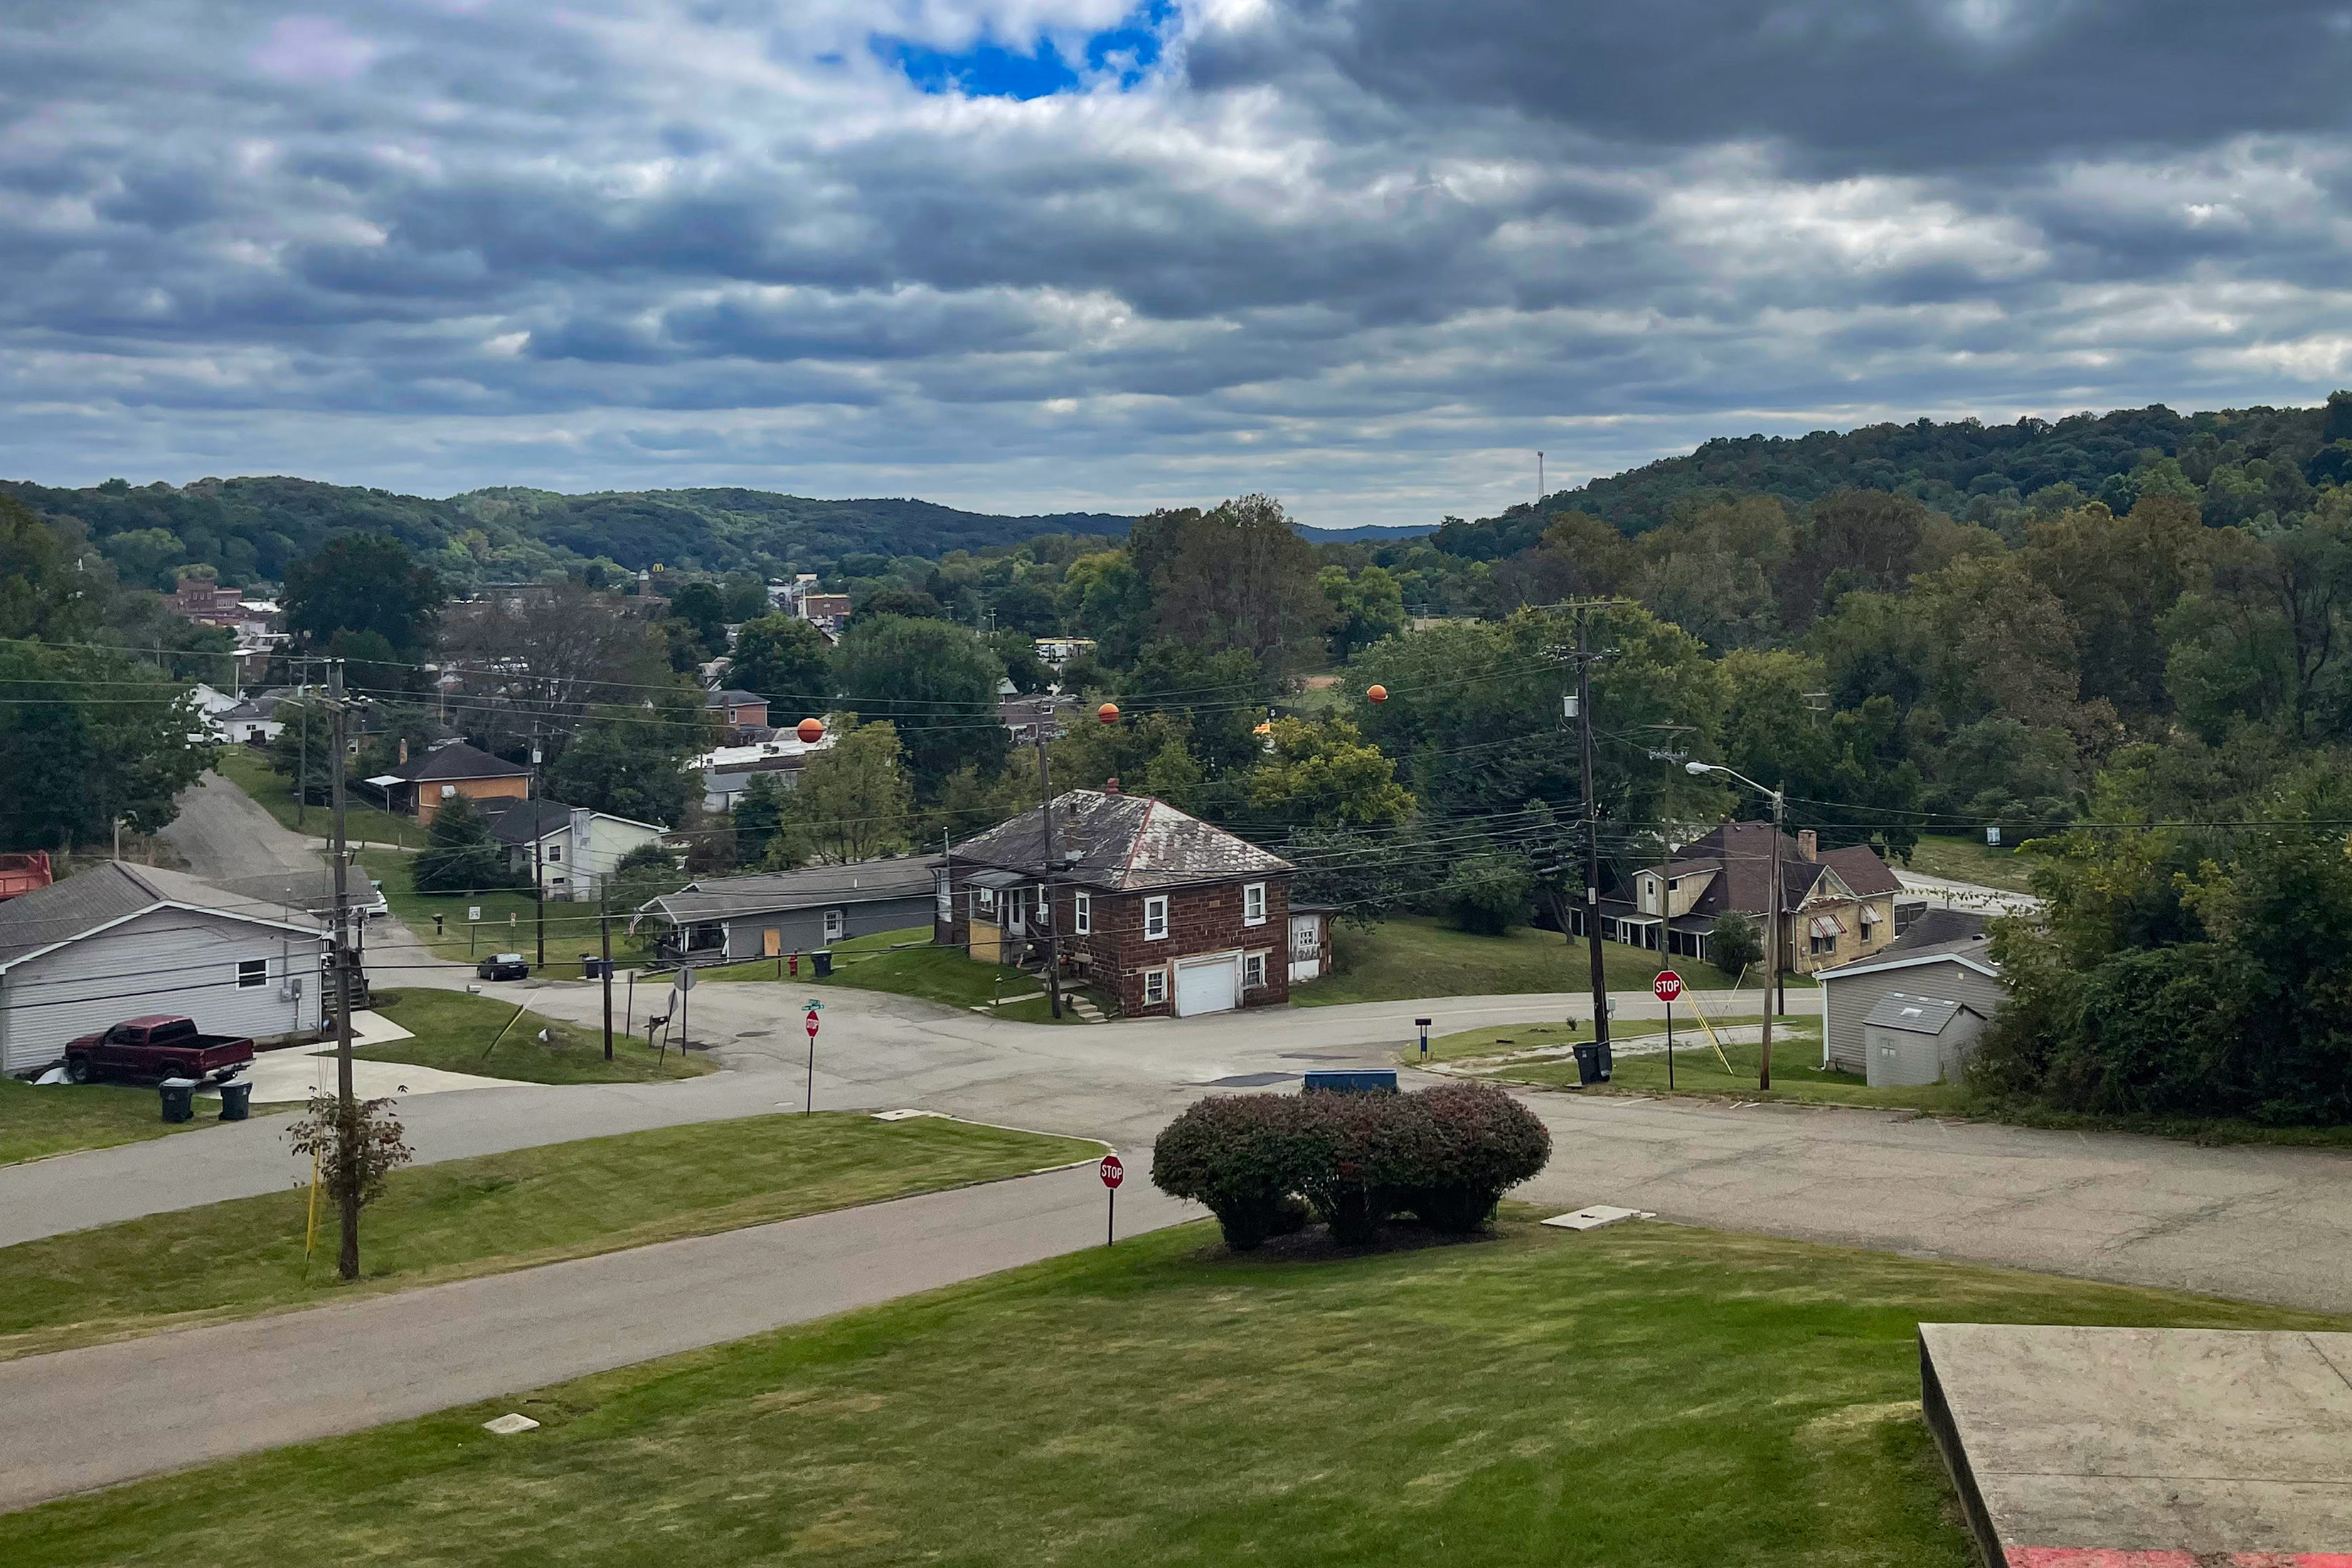 A photo shows a view overlooking downtown Nelsonville in Ohio. It is a grassy, hilly area with wide roads.